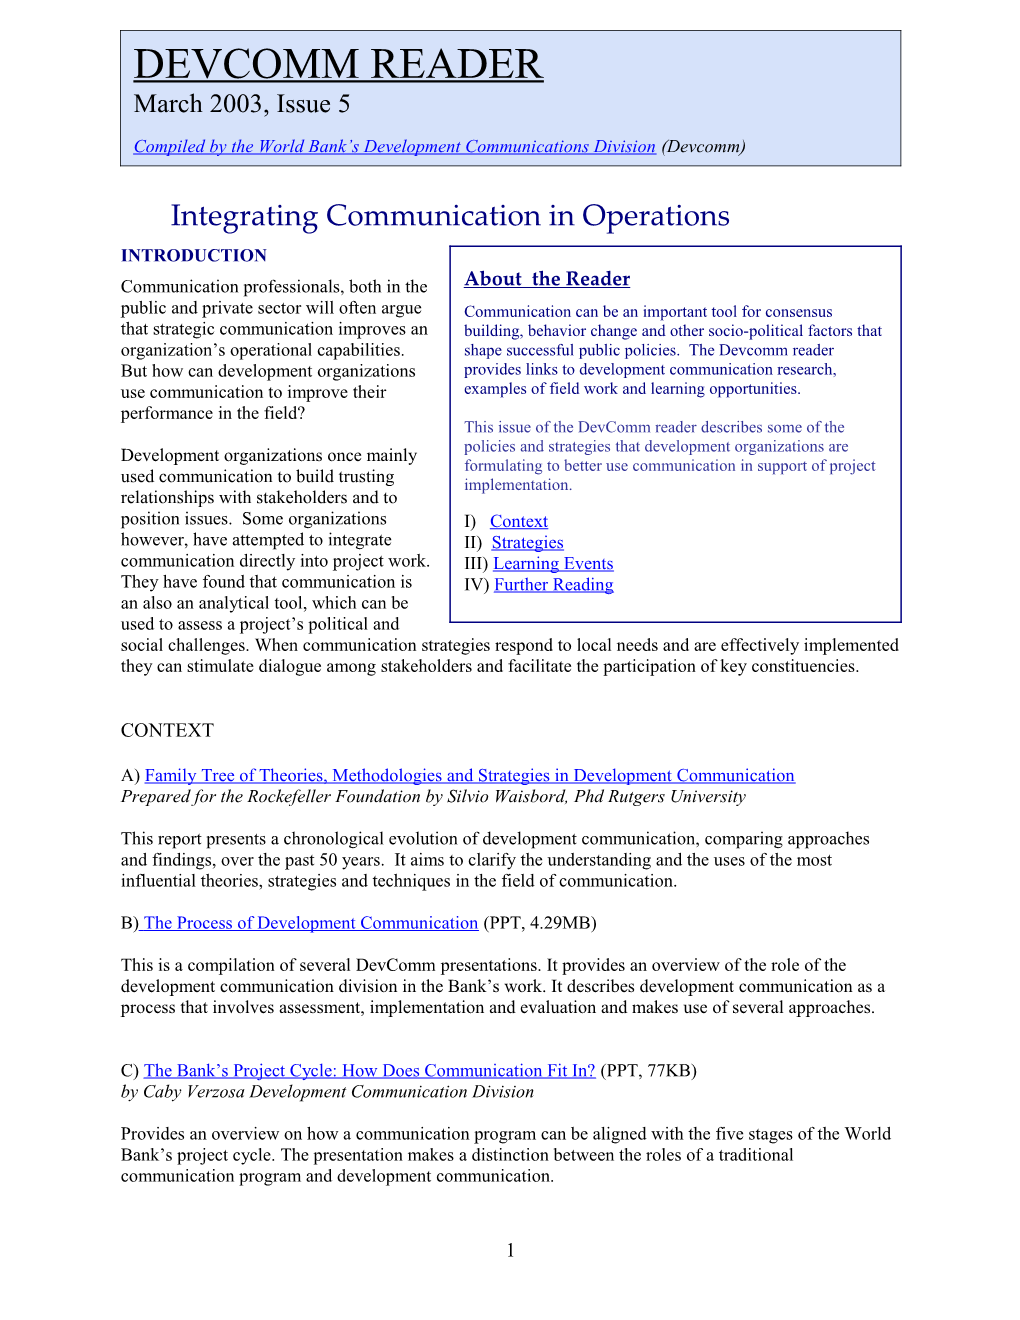 Integrating Communication in Operations